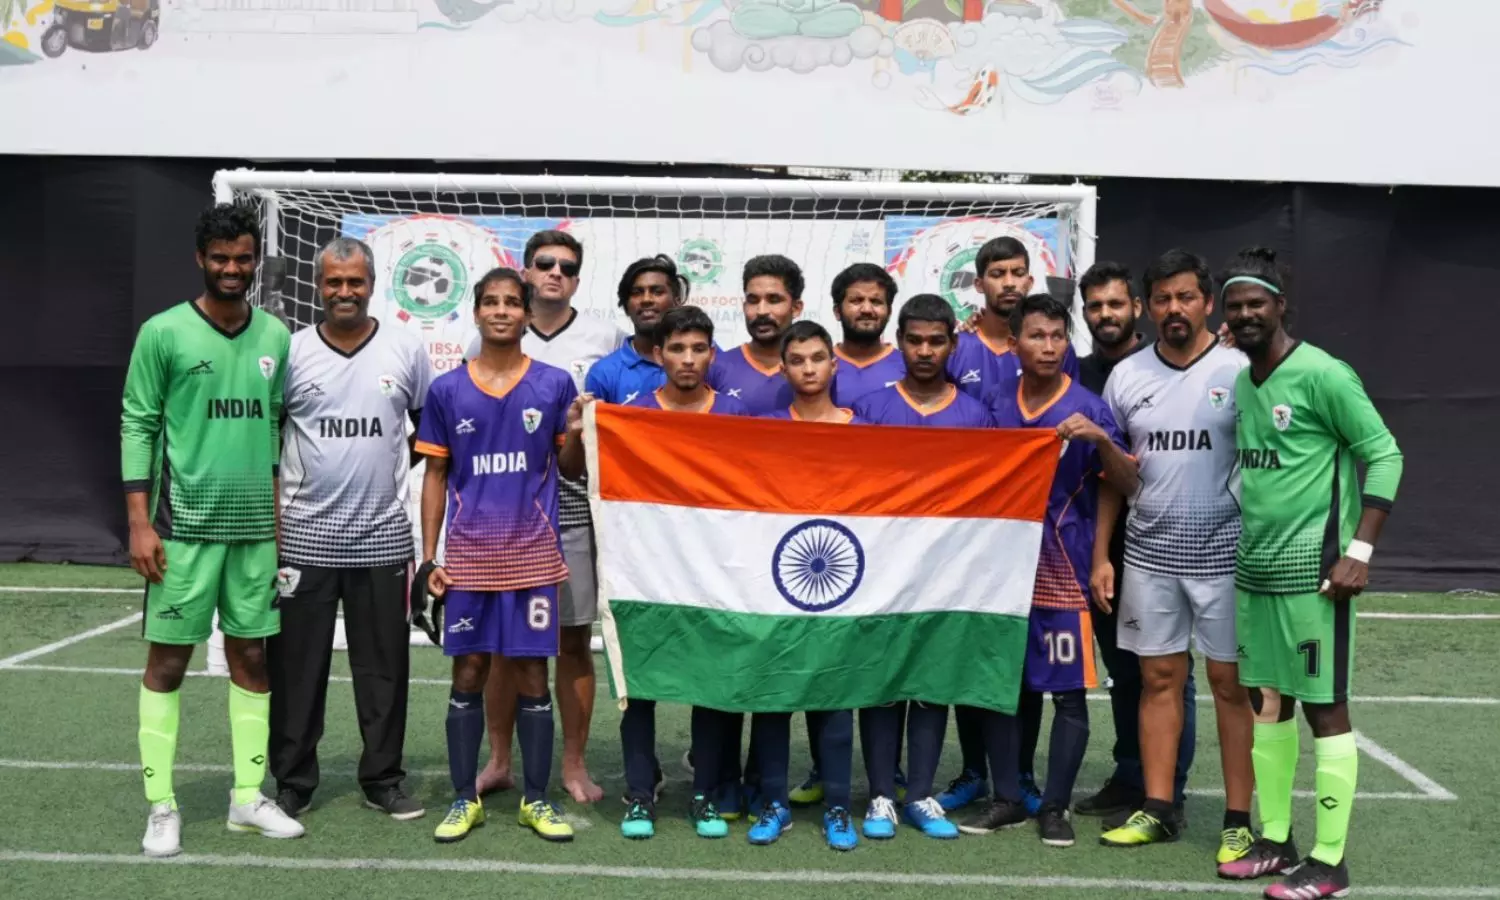 Indian Men's team is ranked 14th in the world and finishes 7th at the Asian Ch'ships'22 slide